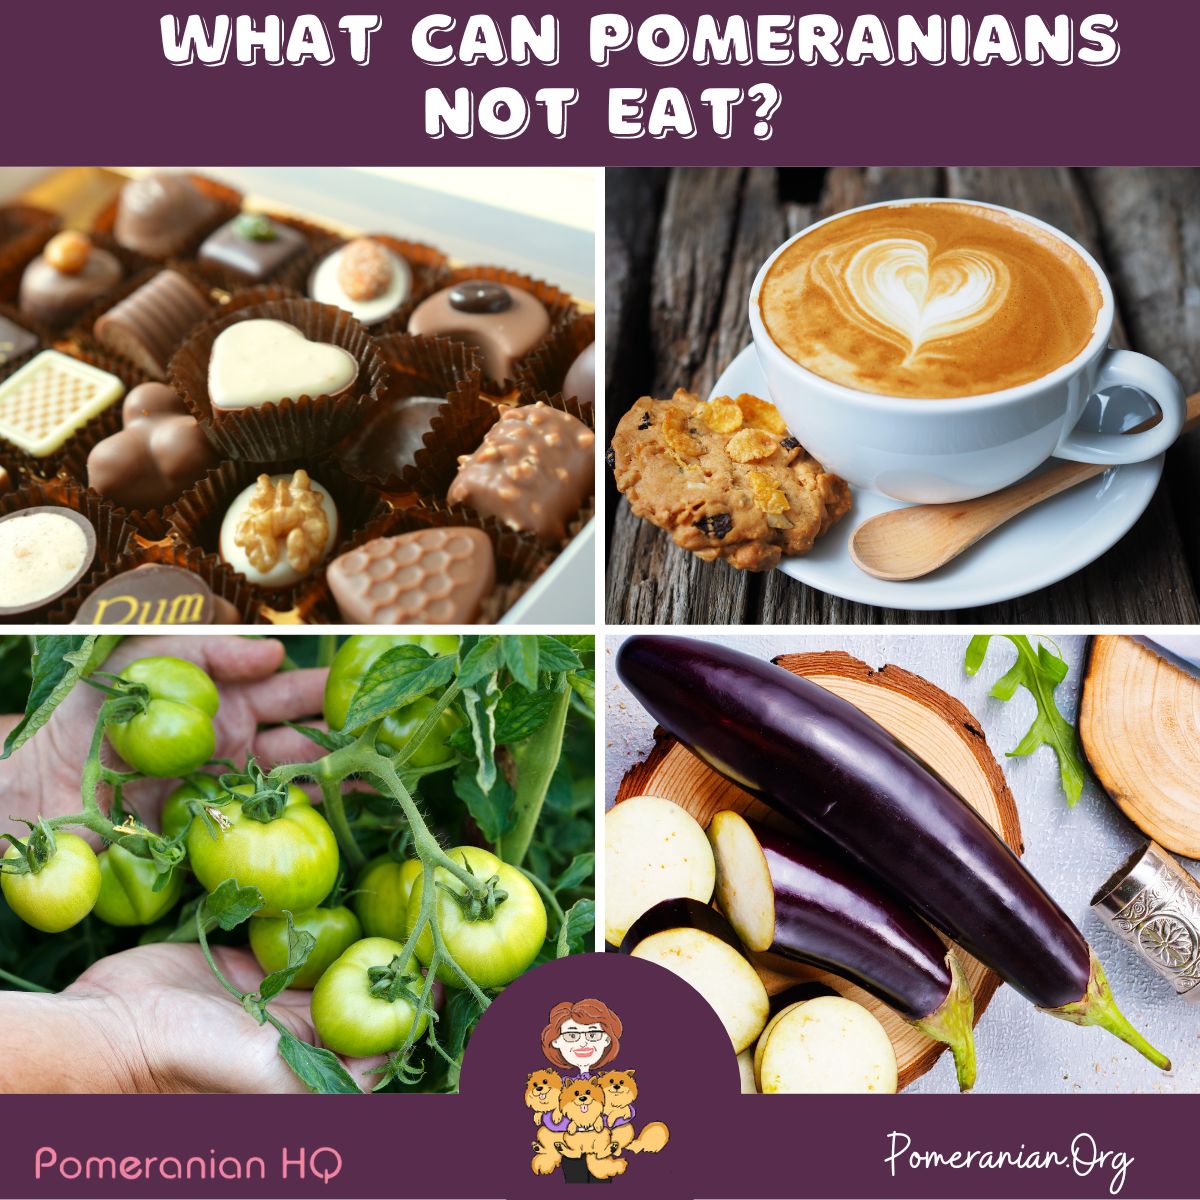 What Can Pomeranians Not Eat?